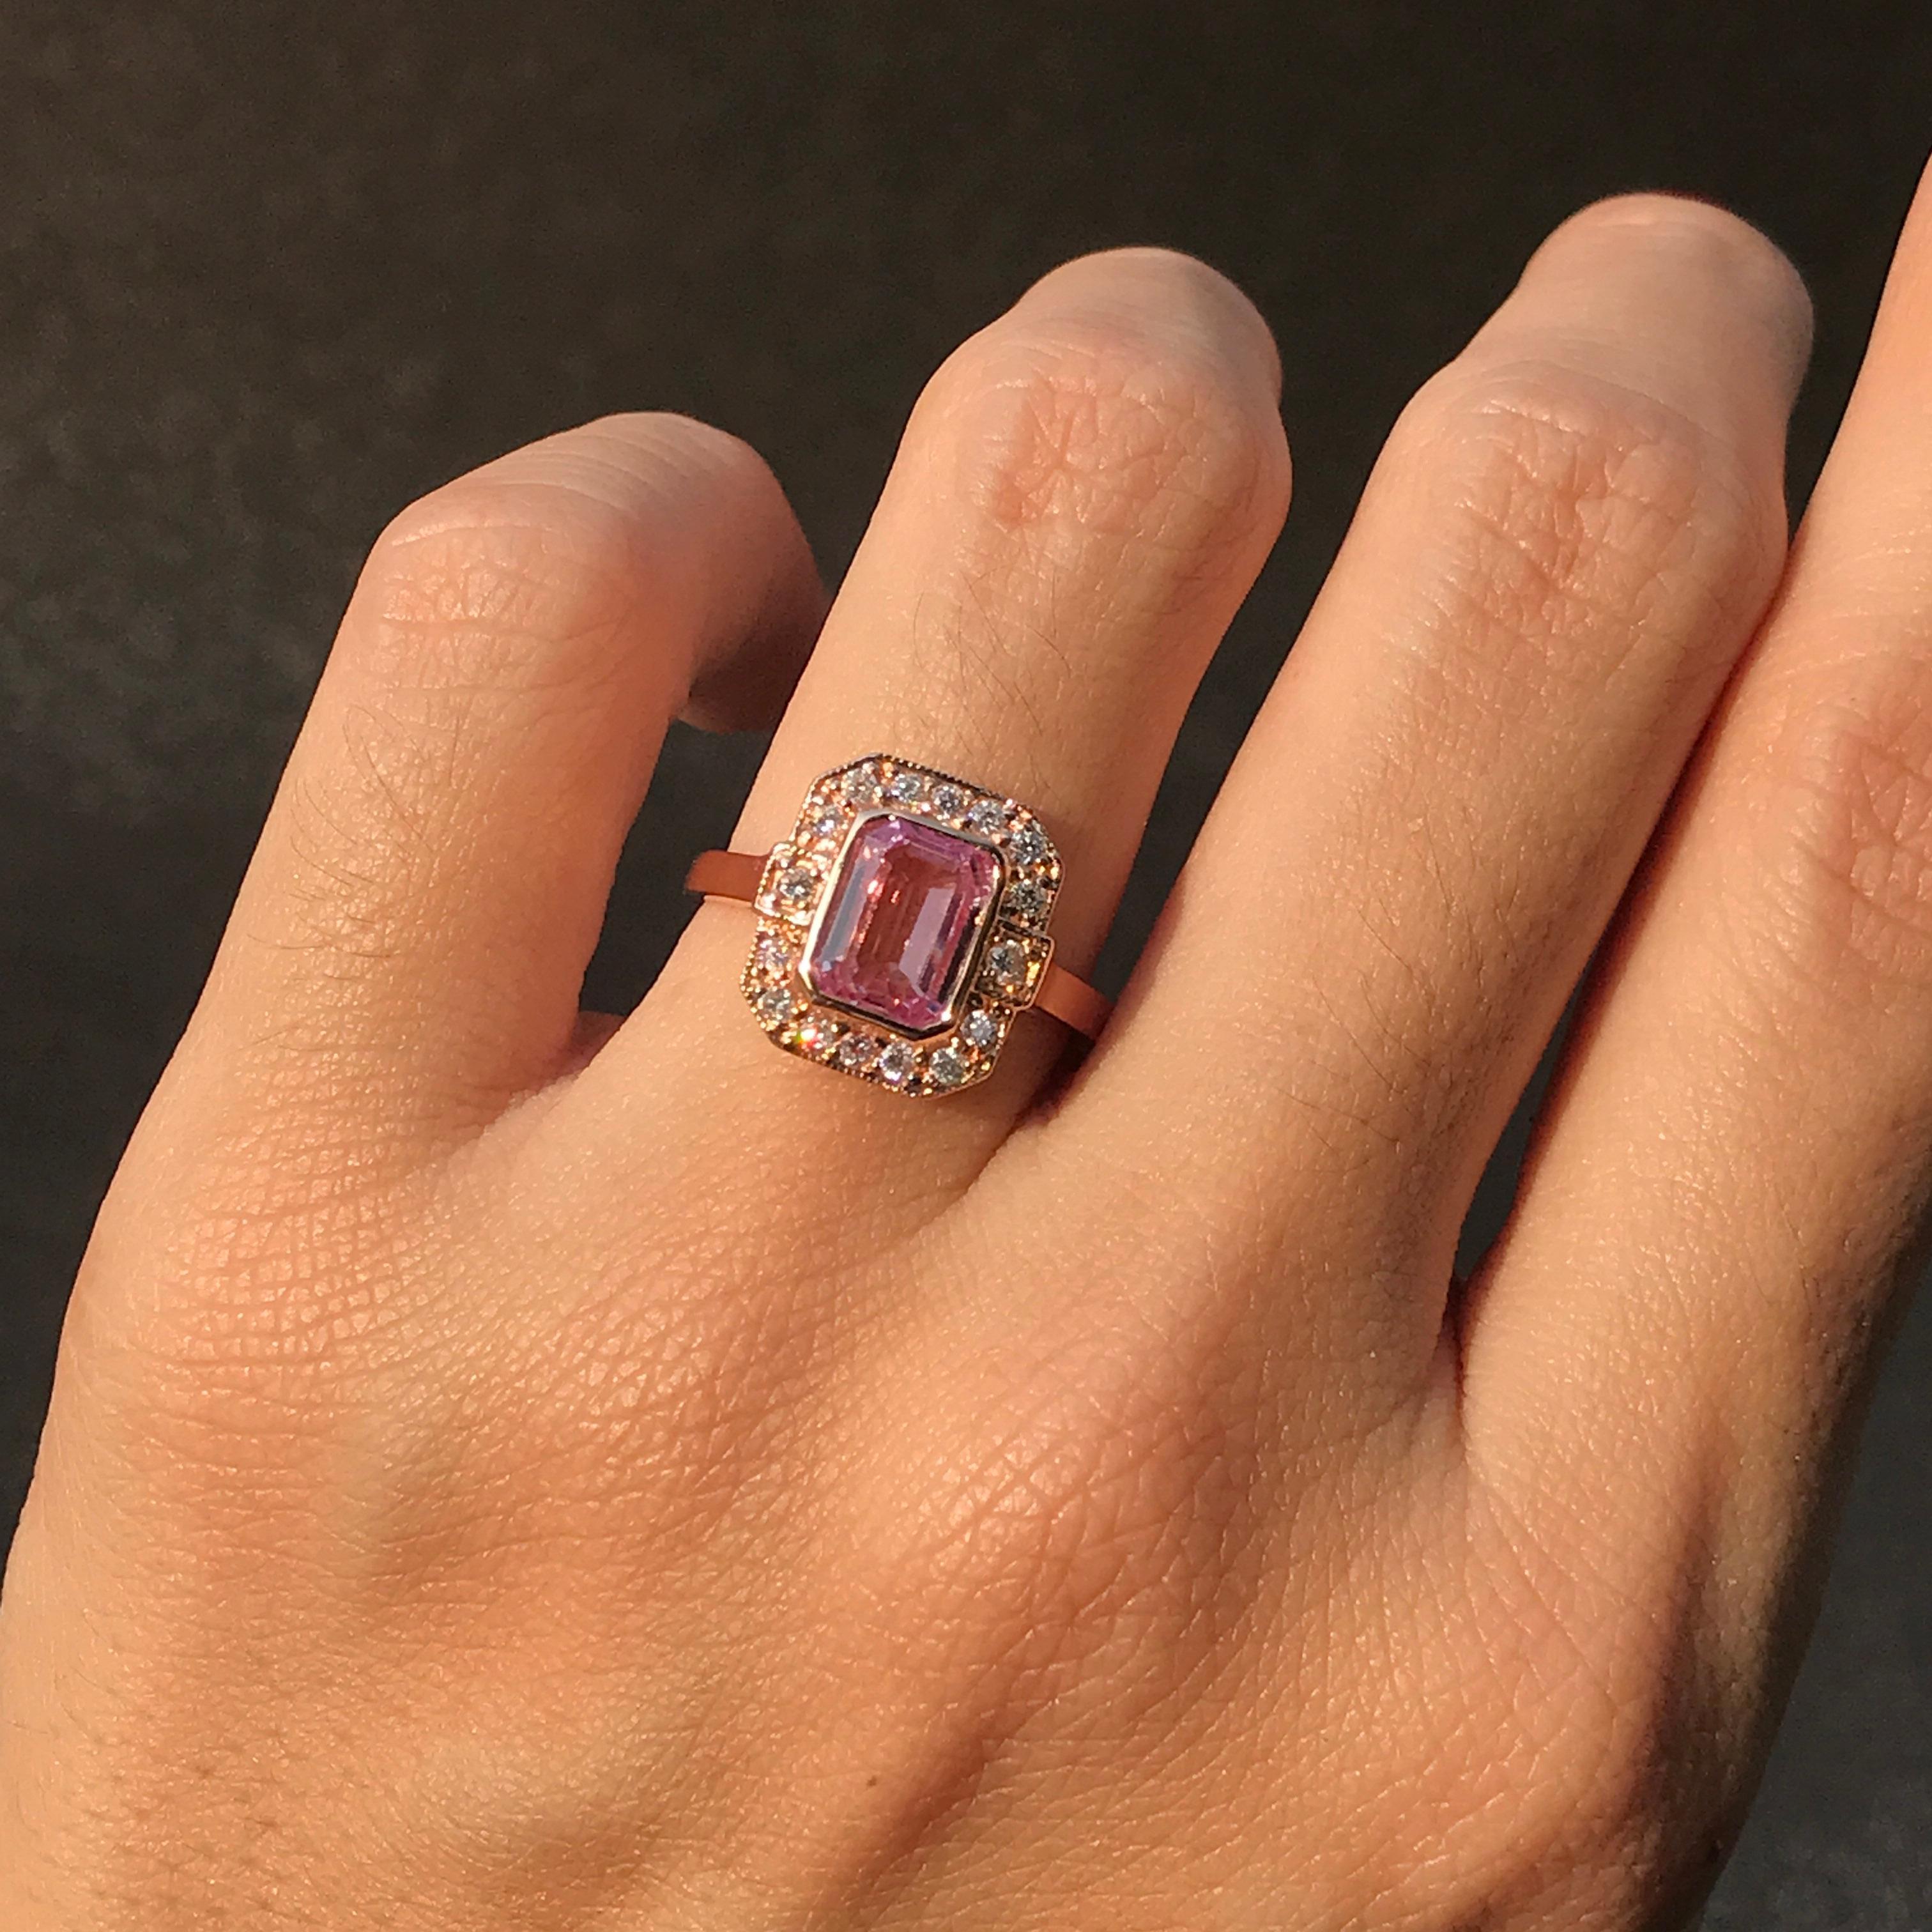 A gorgeous Art Deco inspired emerald cut pink sapphire is presented in classic Art Deco style. The glorious gemstone radiates from within a sparkling halo of bright round brilliant cut diamonds all set in18k rose gold.

Ring Information
Style: Art